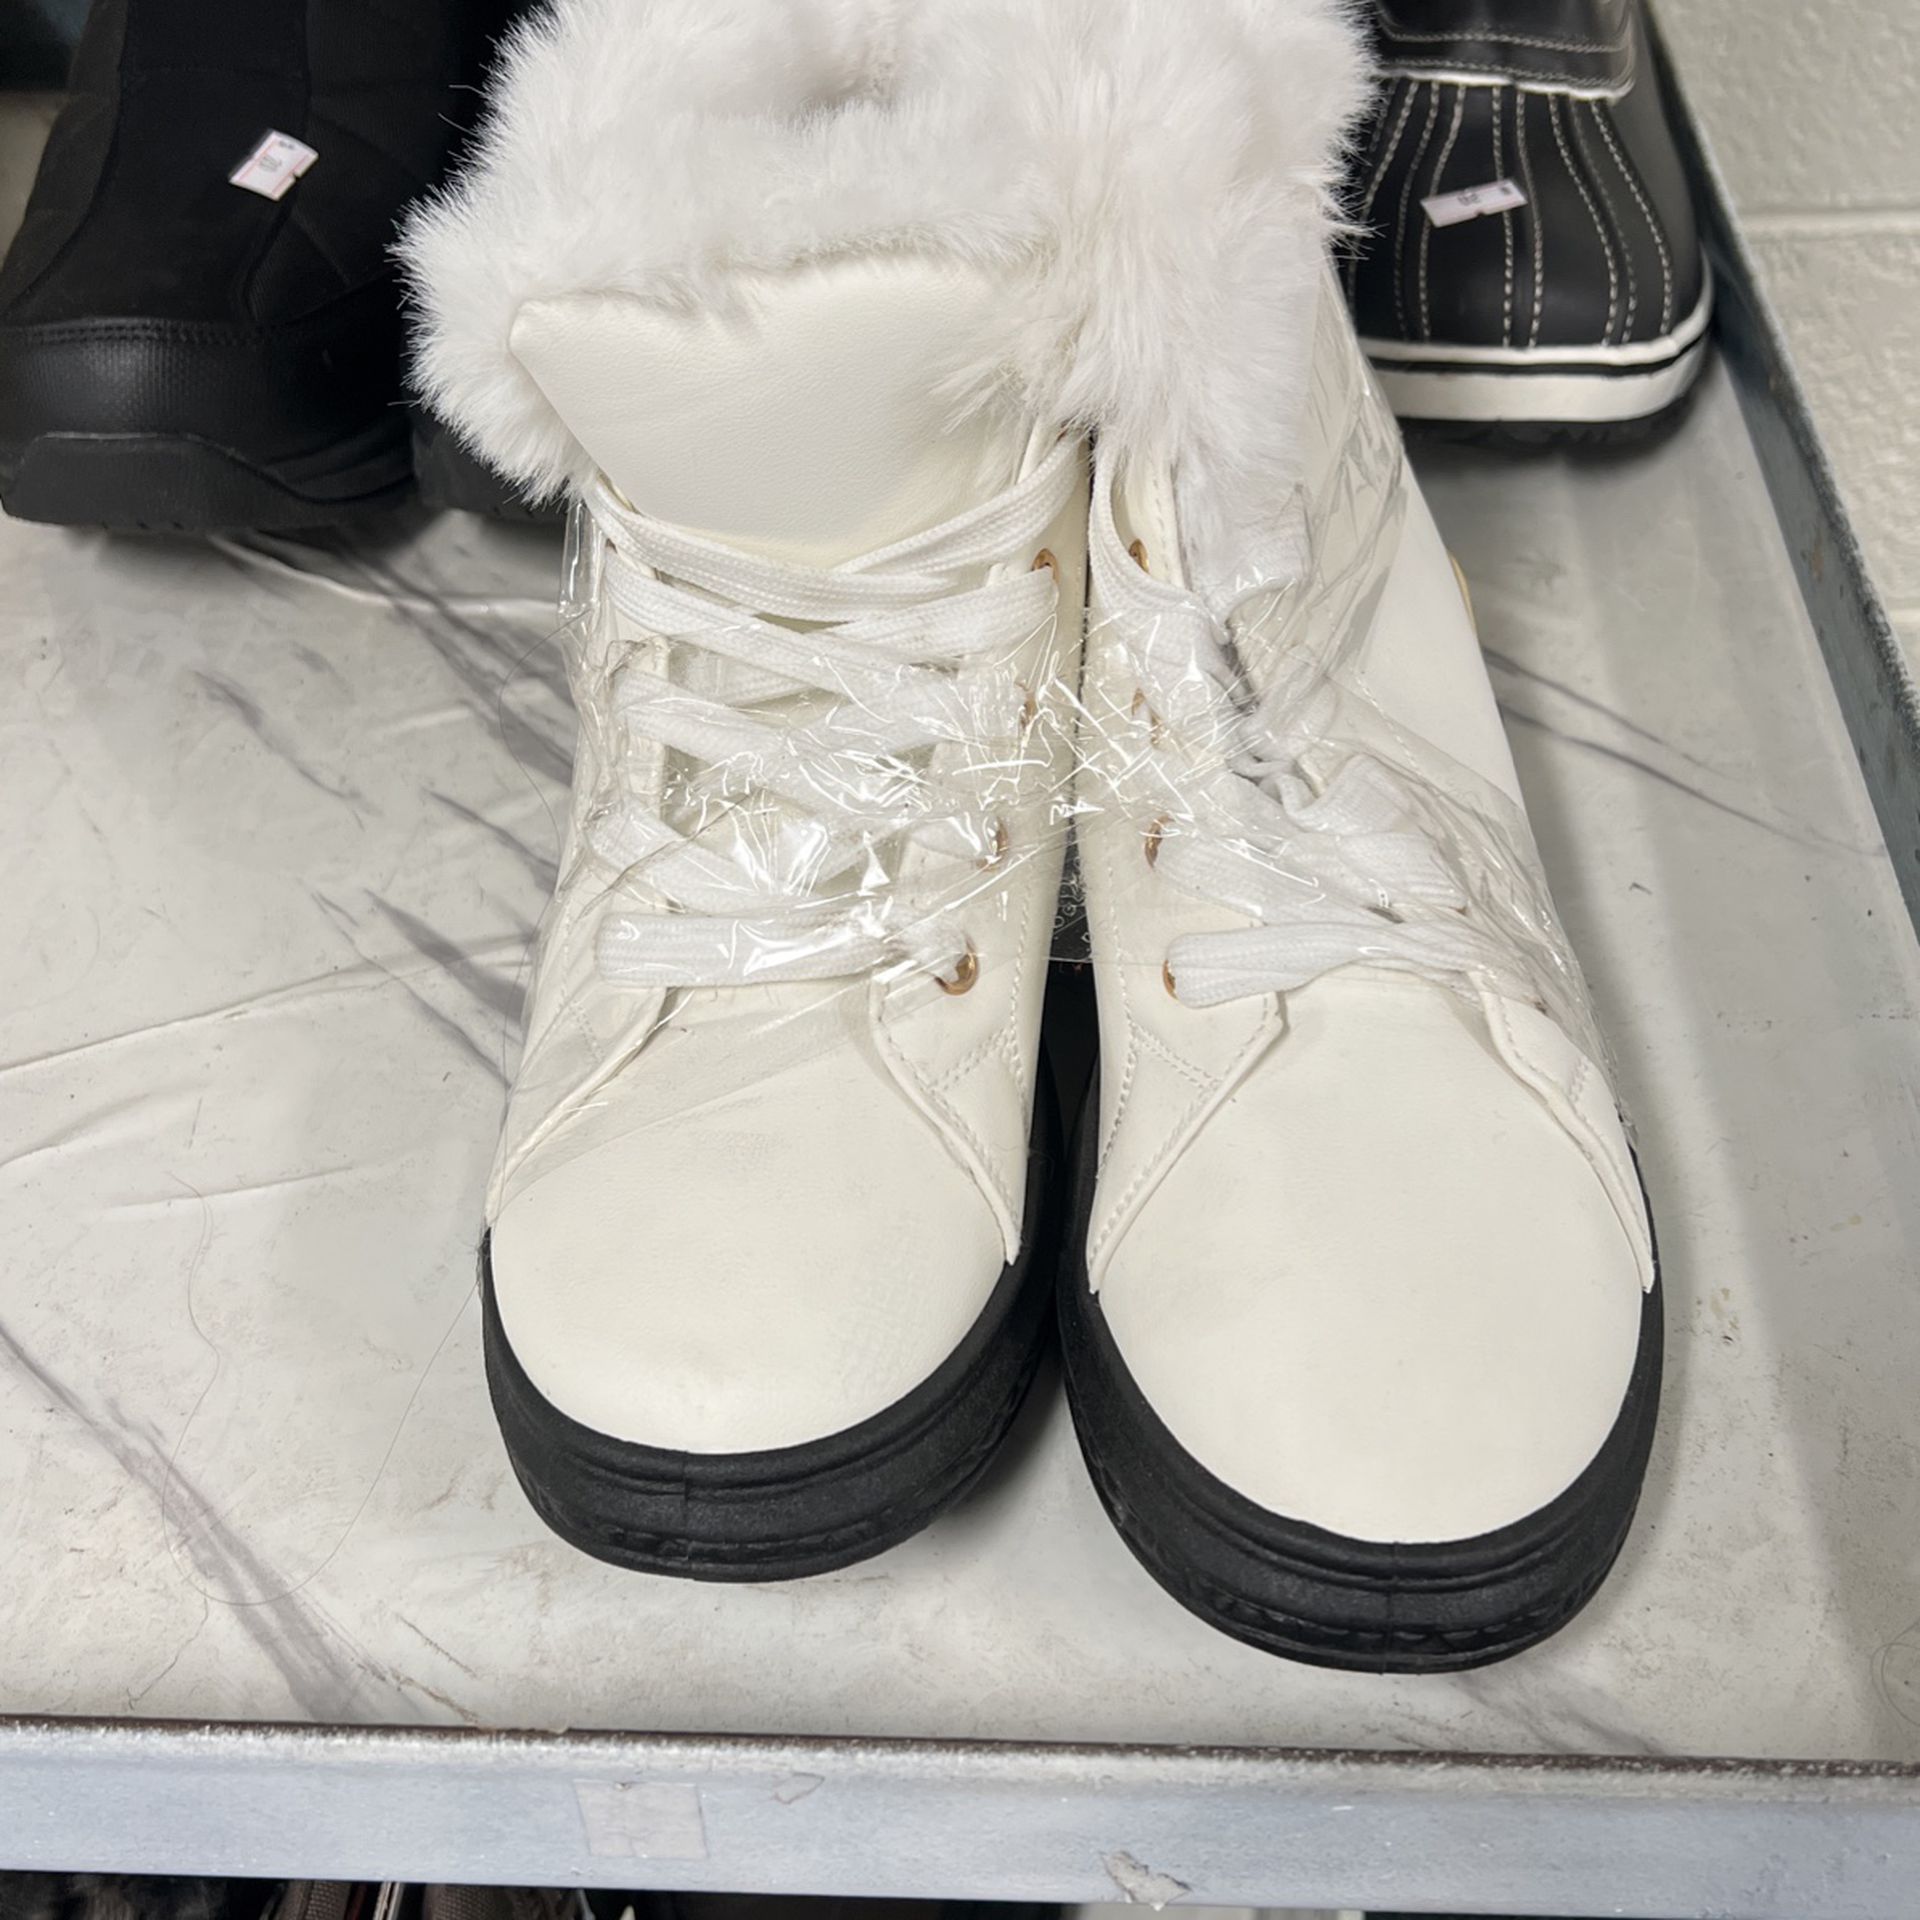 Women’s Winter Boots, Fur-Lined - Size 9